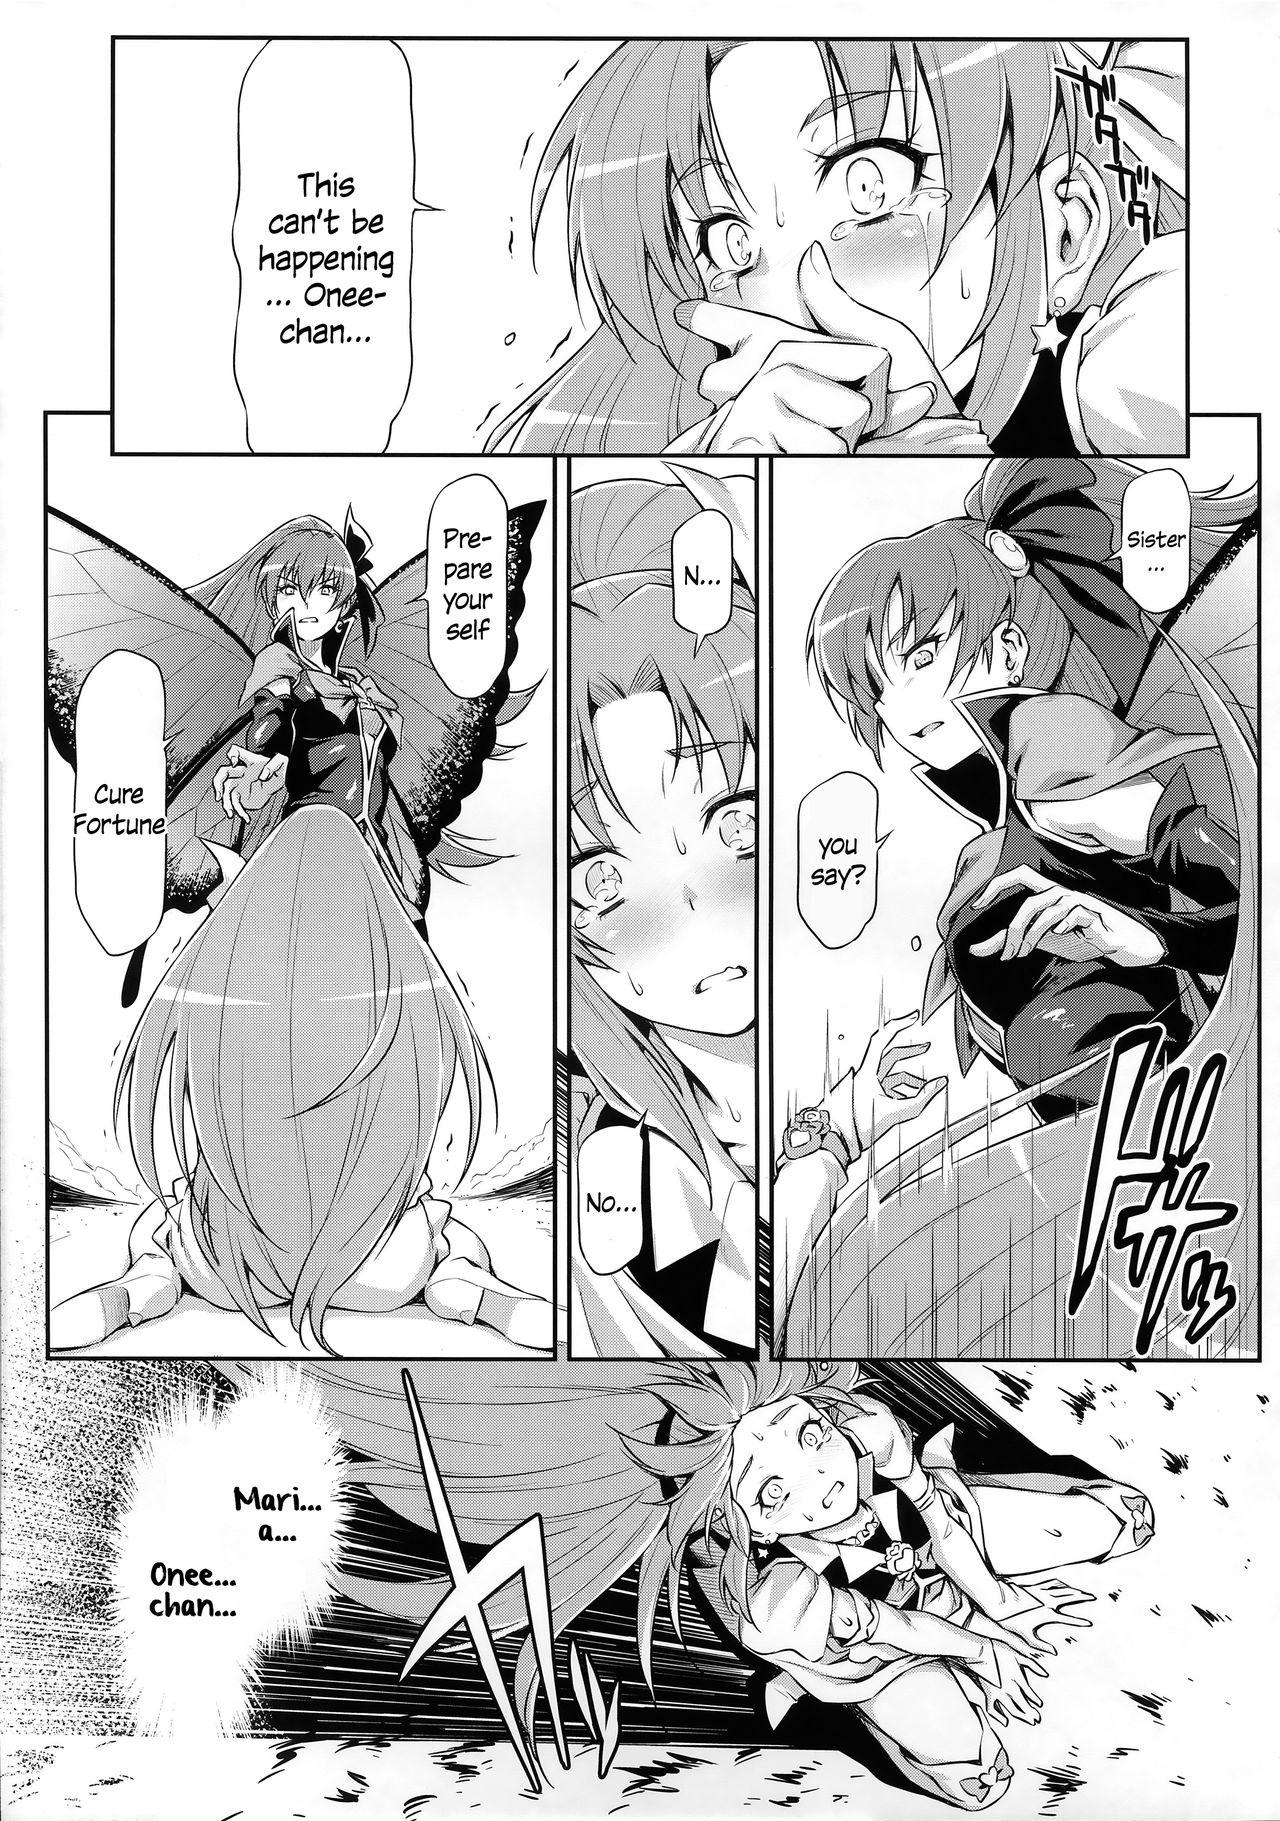 Jerking Butterfly and Chrysalis - Happinesscharge precure Euro - Page 8